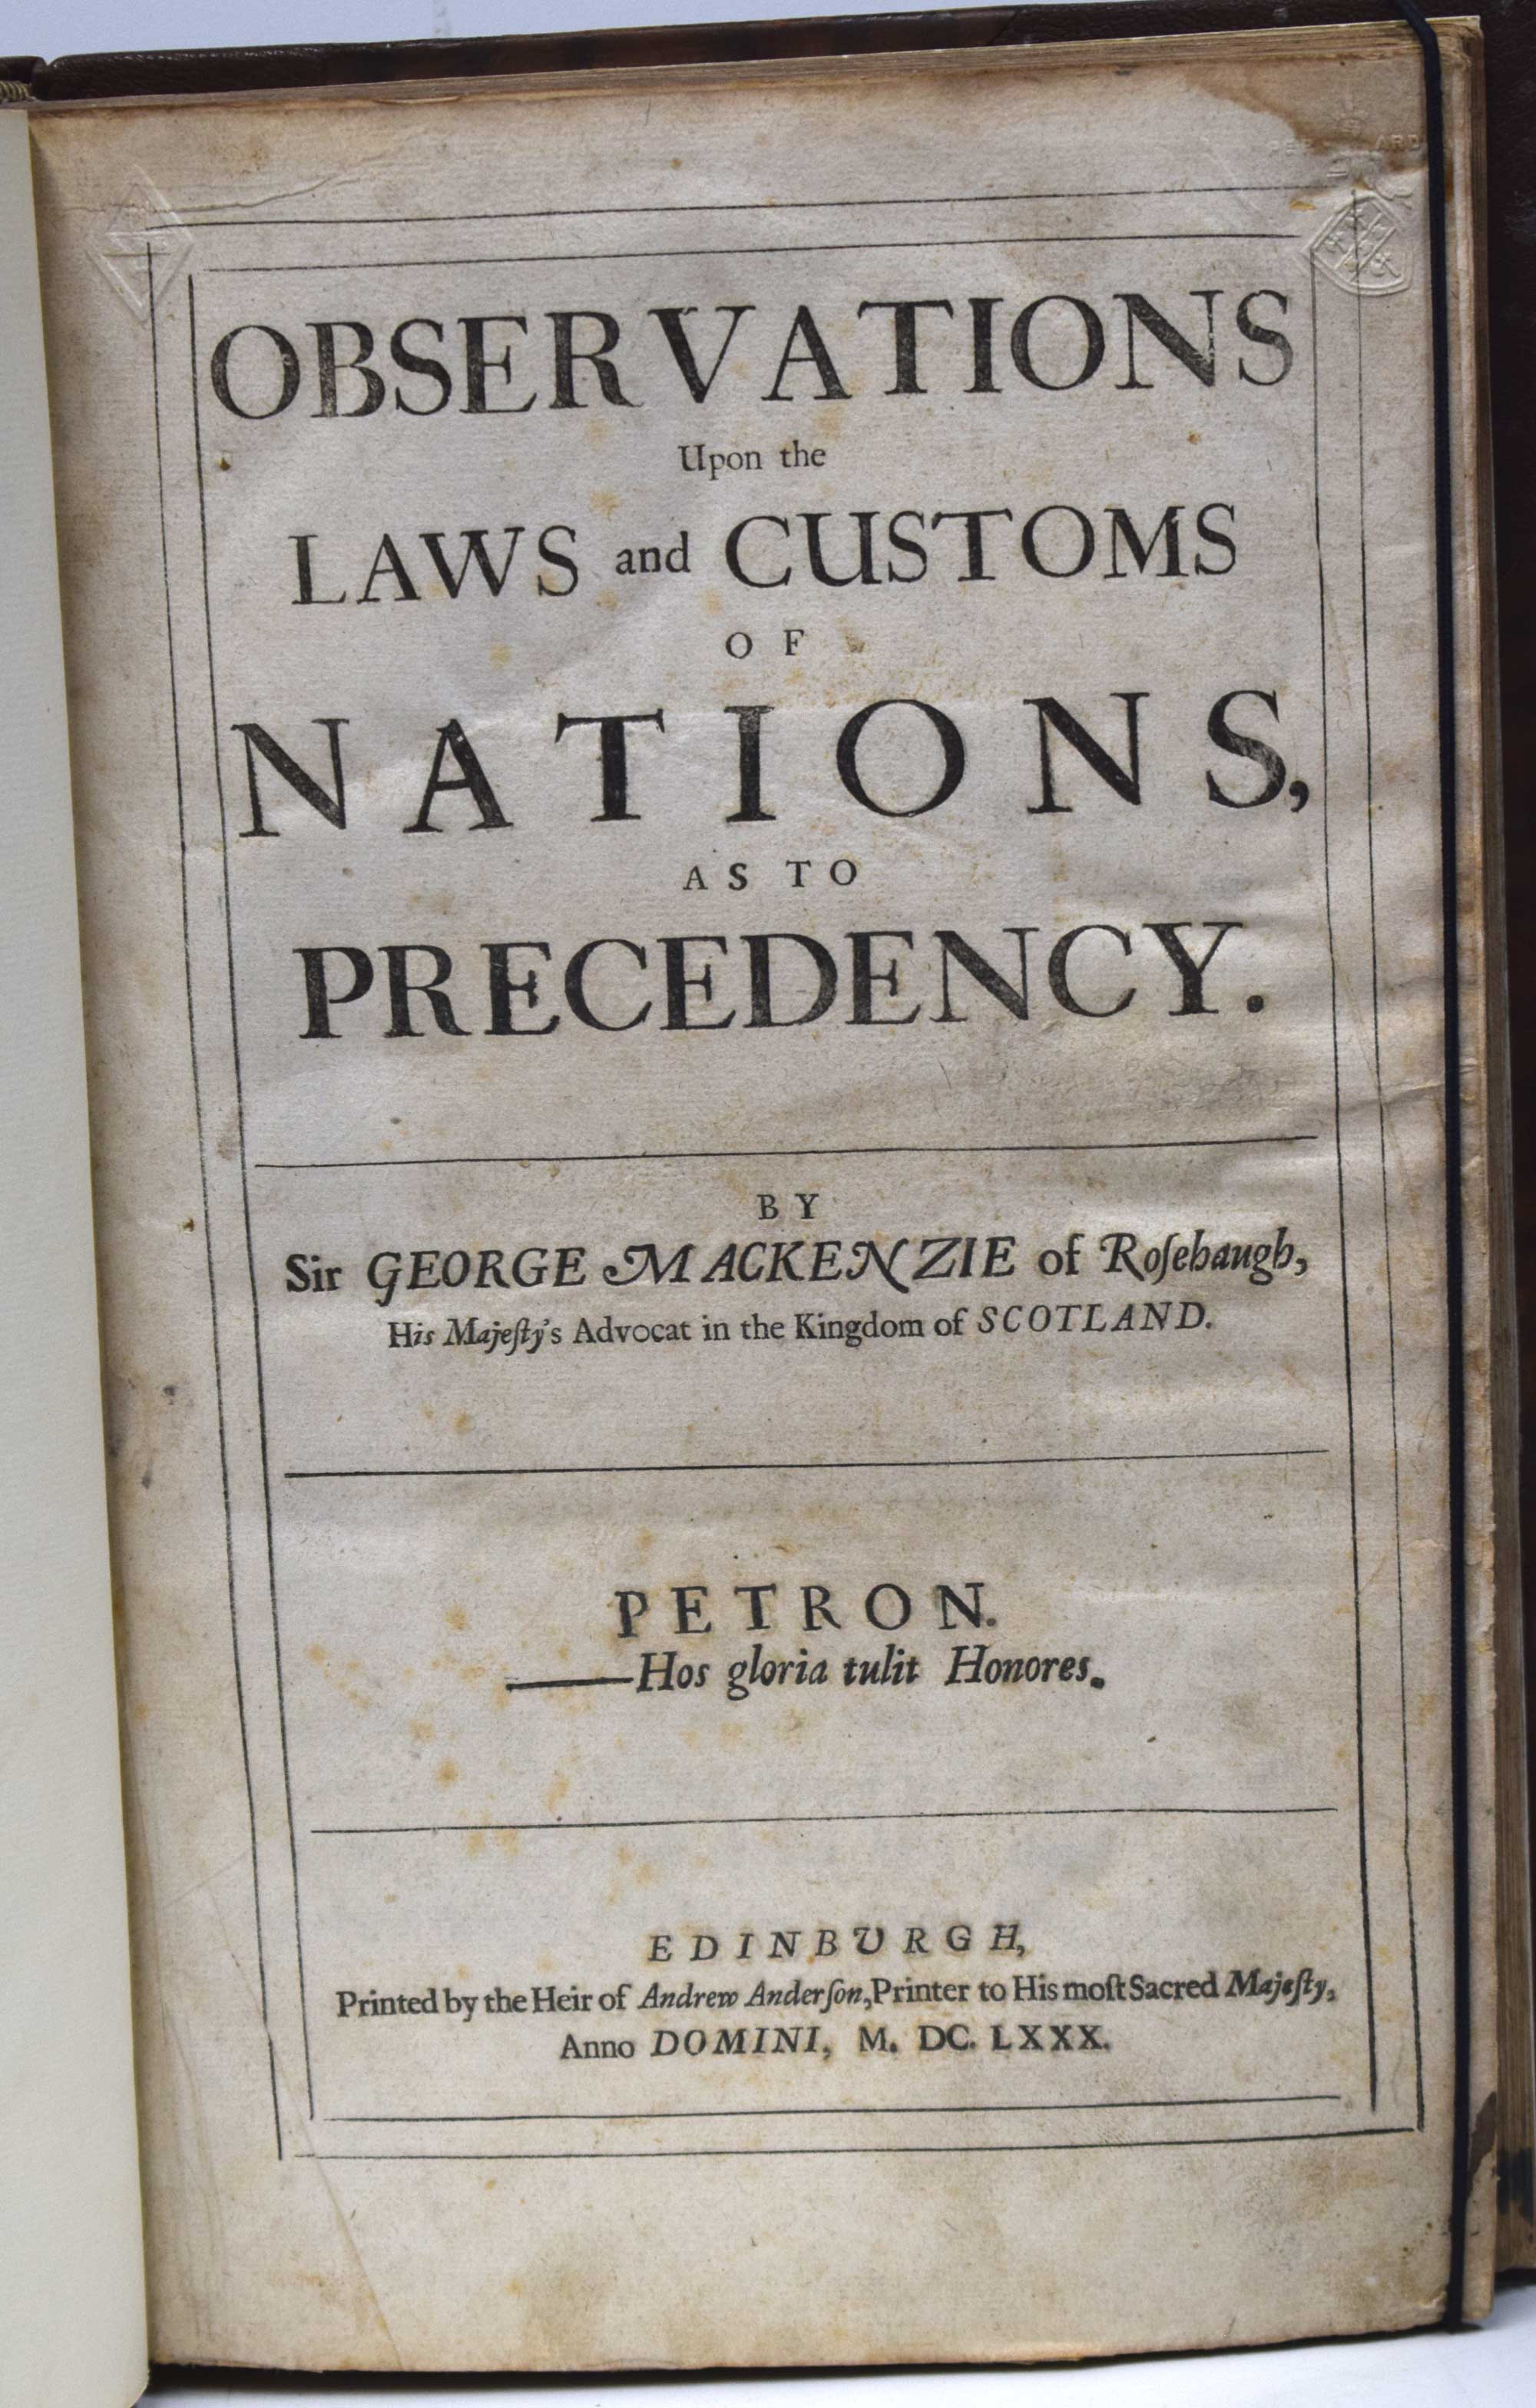 Observations Upon the Laws and Customs of Nations as to Precedency. [bound with] The Science of Herauldry, Treated as Part of the Civil Law, and Law of Nations: Wherein Reasons are Given for Its Principles, and Etymologies for Its Harder Terms.